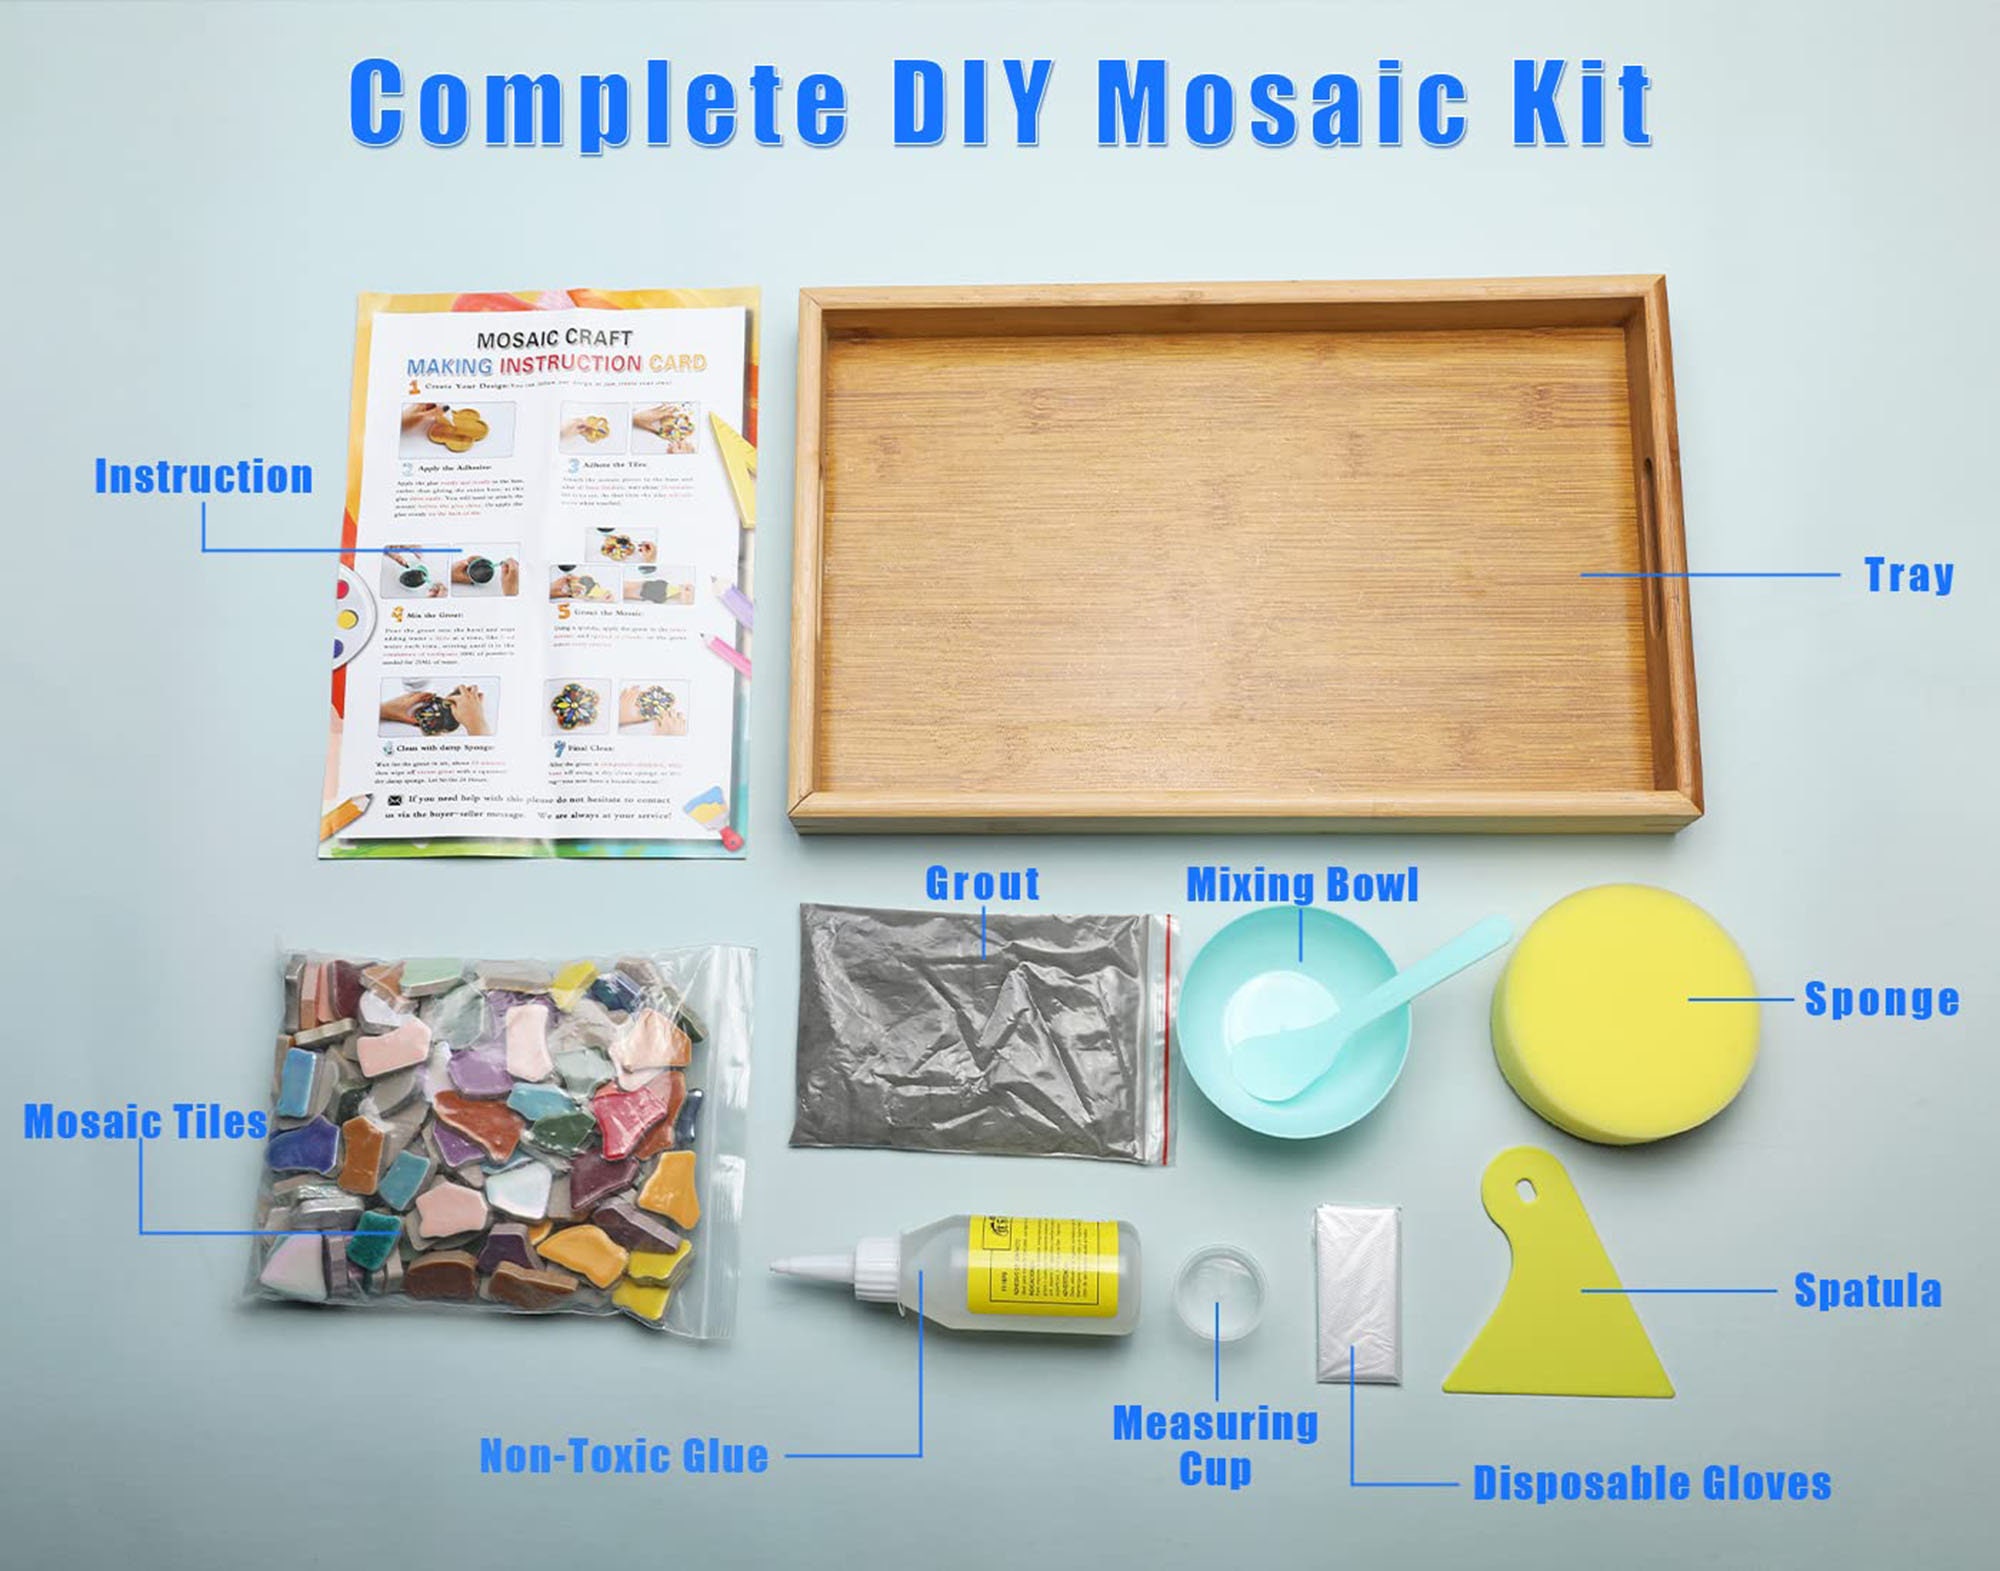  Jashlife DIY Mosaic Craft Draw Kits Mosaic Tiles Adult Art and  Craft Kit Make Your Own Mosaic Project Handmade Craft Draw Set with Stained  Glass Mosaic Tile Pieces for Gift and